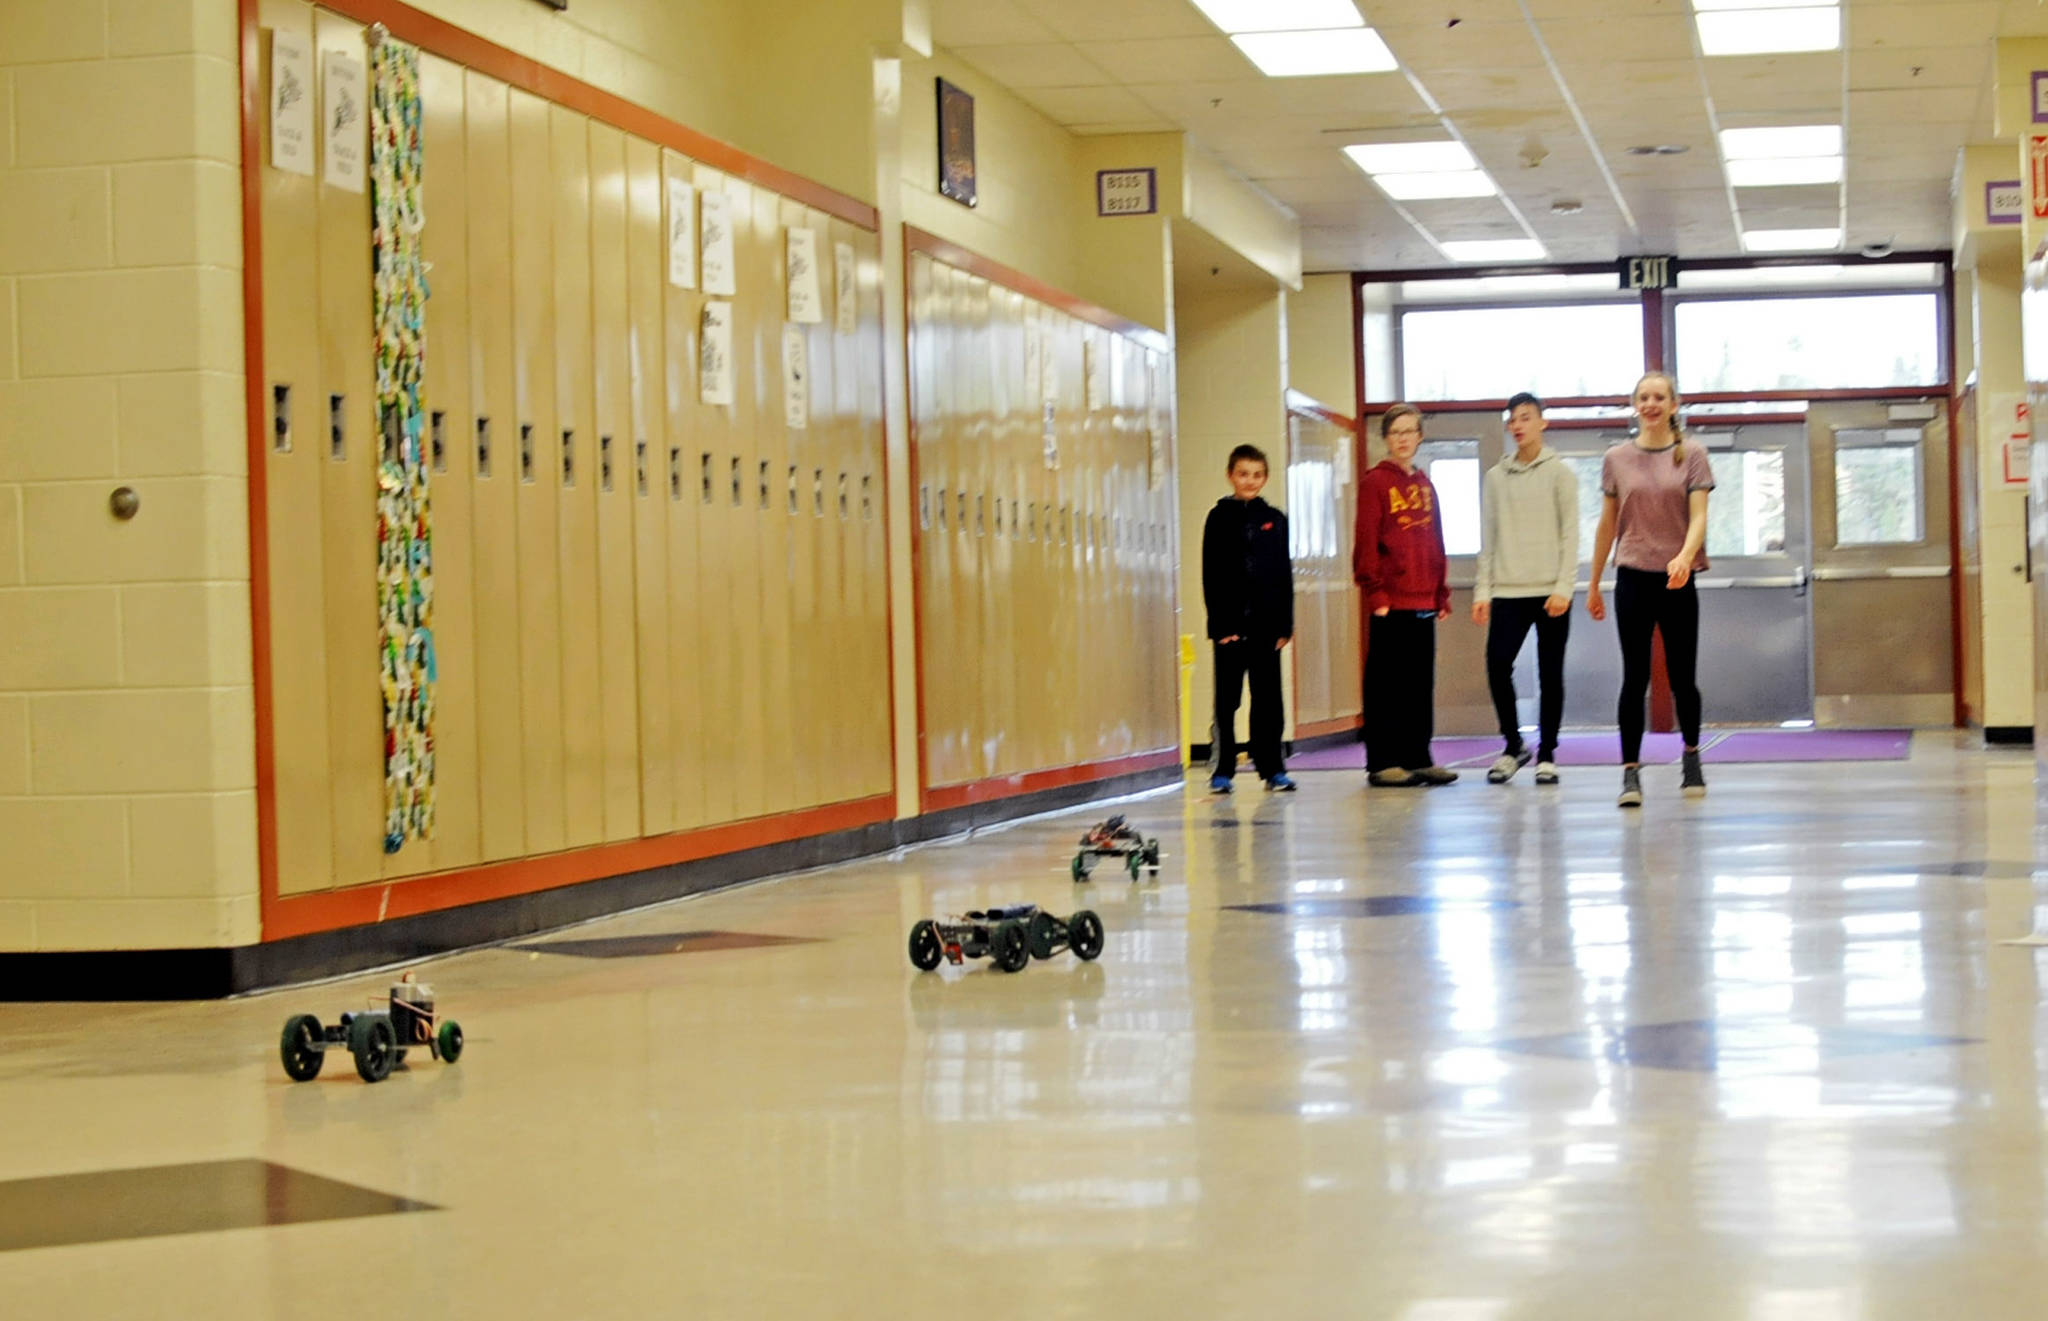 Students in Shelly Church’s robotics class through the “Project Lead the Way” program race the robotic cars they built down the hallway at Skyview Middle School on Thursday, May 17, 2018 in Soldotna, Alaska. Andeavor presented the Kenai Peninsula Borough School District with a $175,000 check Thursday to support programs in career and technical education, including purchasing new computers and carts for Project Lead the Way, additional funds for the Upstream Academies and the Career and Technical Education program SkillsUSA. (Photo by Elizabeth Earl/Peninsula Clarion)